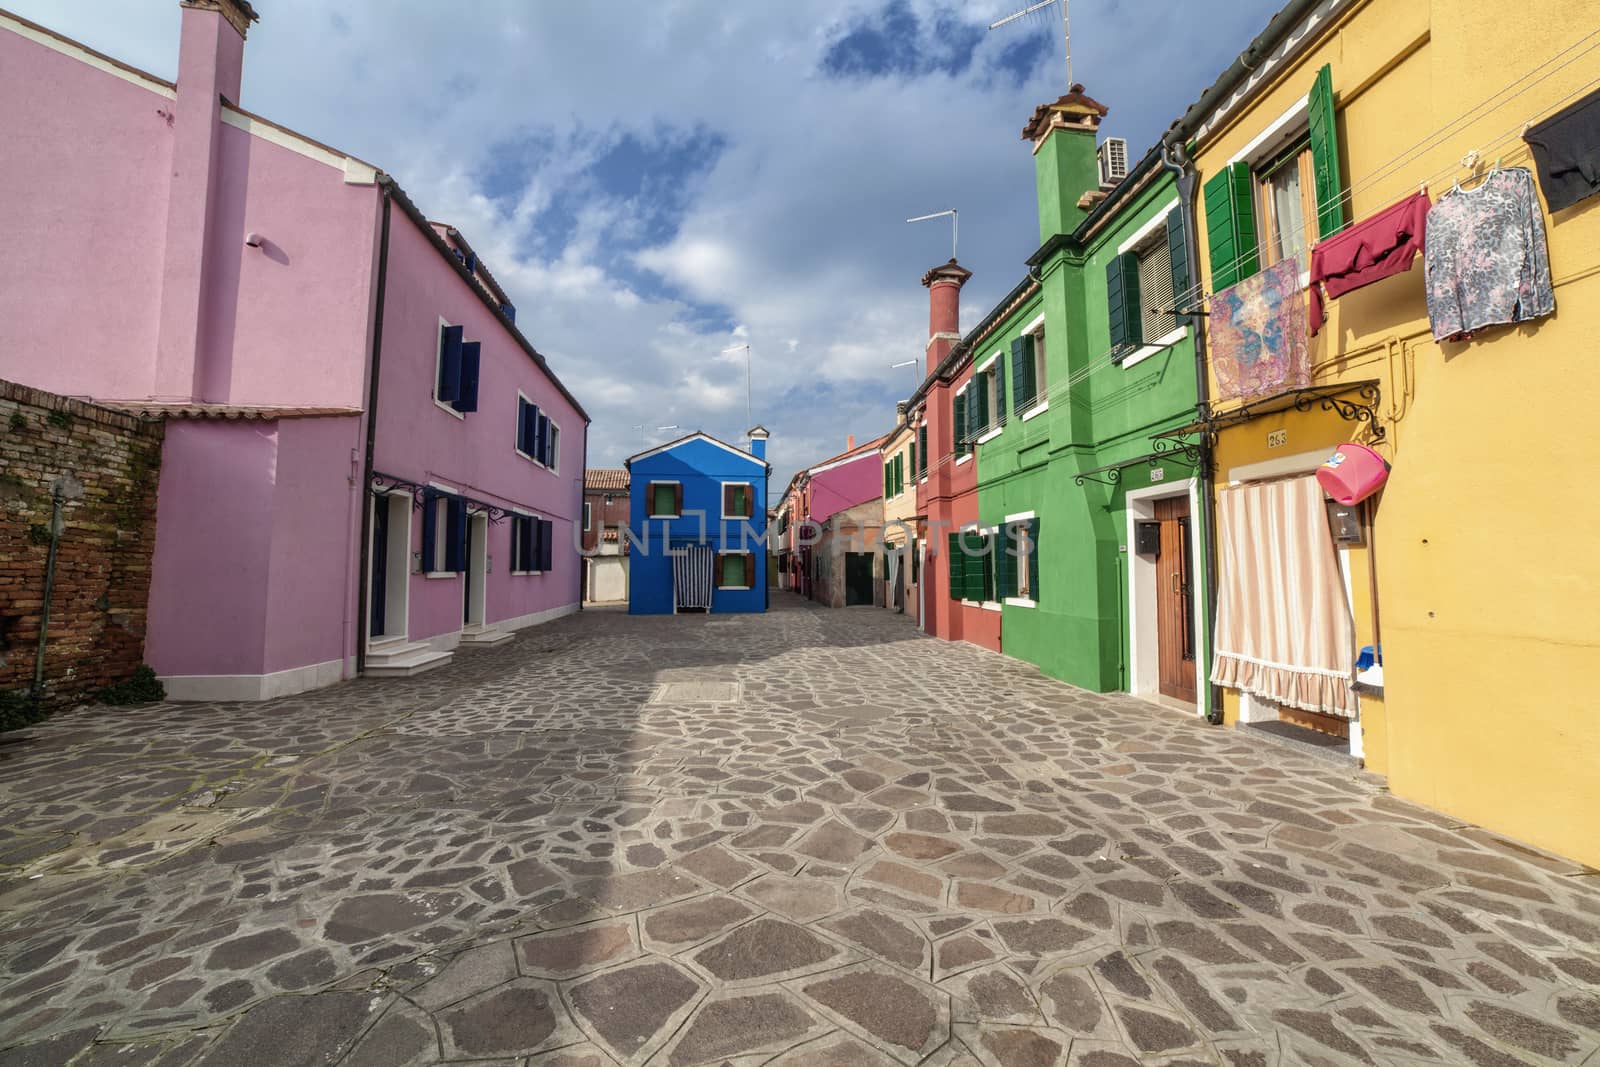 Lovely buildings in Burano Island, Italy by pencap